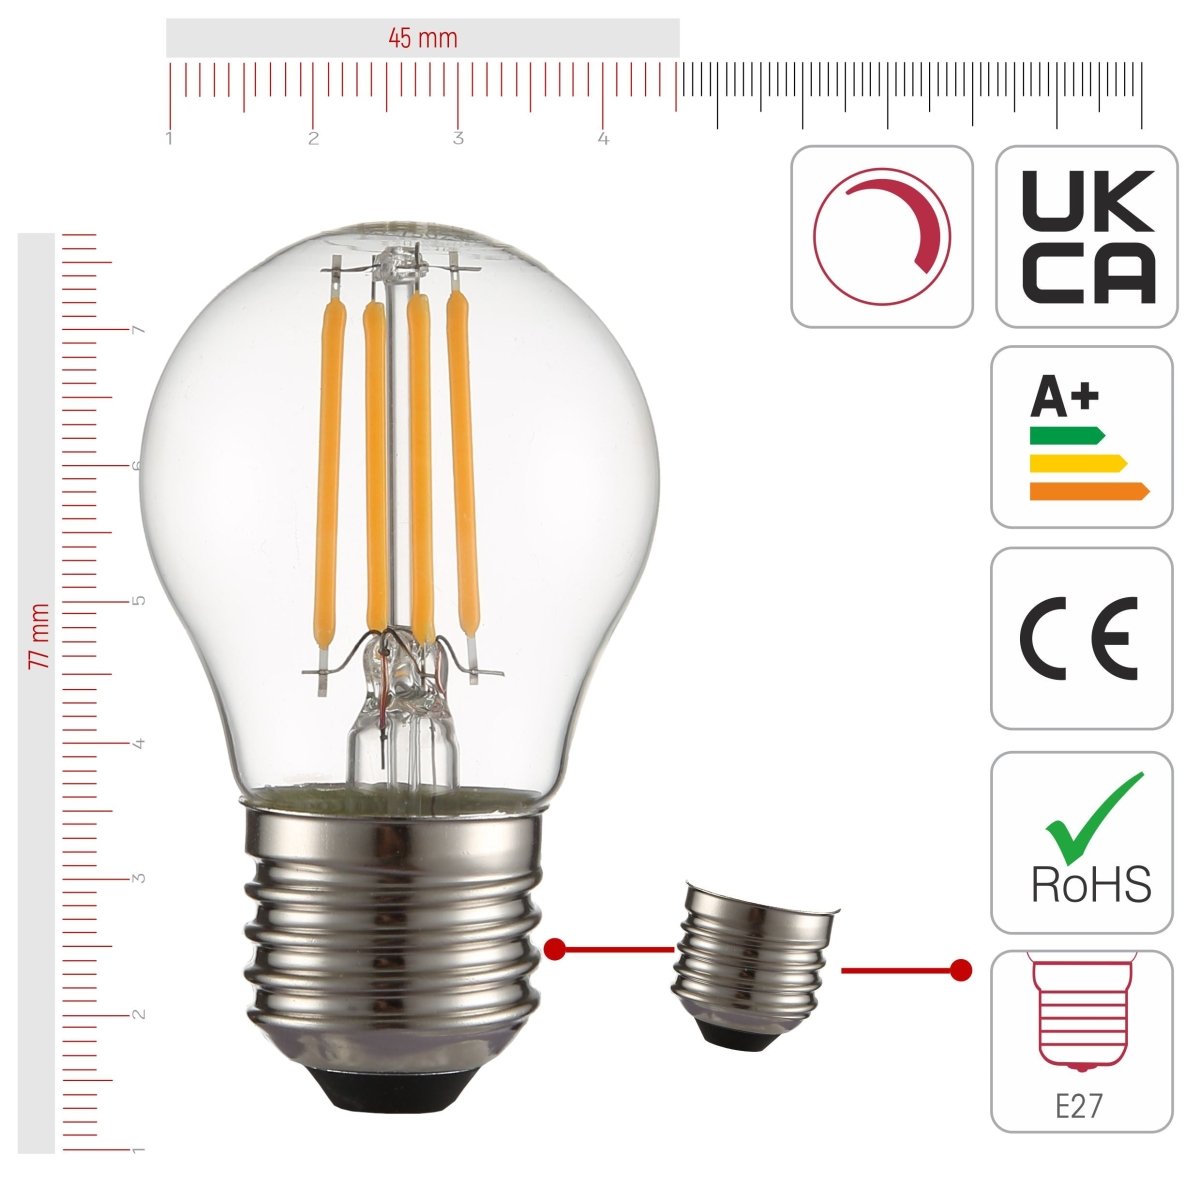 Size and certifications of LED Dimmable Filament Bulb G45 Golf Ball E27 Edison Screw 4W 470lm Warm White 2700K Clear Pack of 4 | TEKLED 583-150244